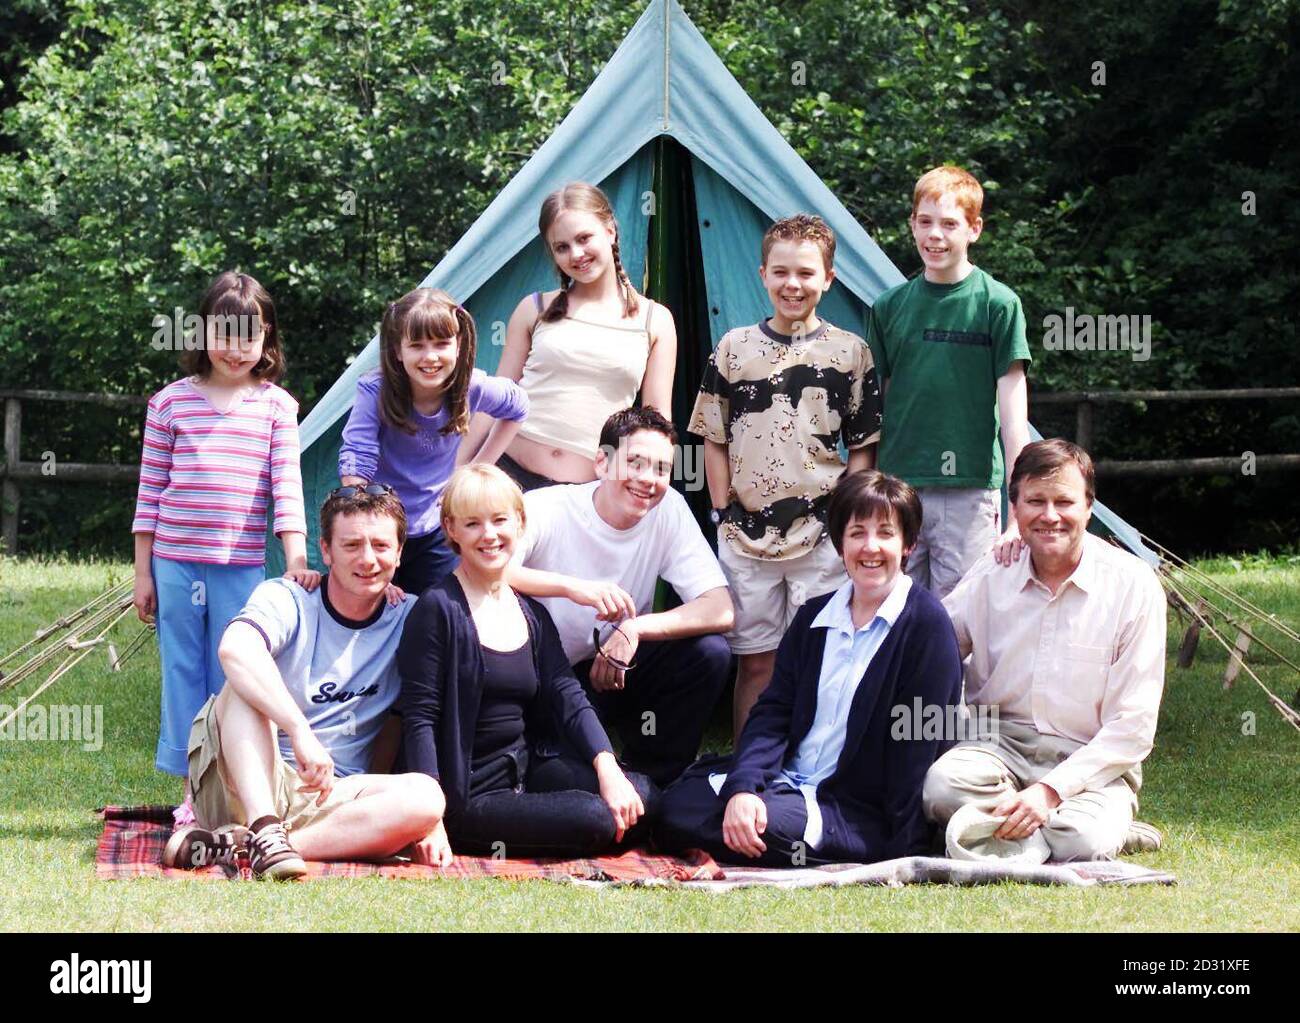 The Coronation Street cast during filming of a camping special, which are entirely set on location in the Chesire countryside. The episodes will be screened on July 23rd, 27th and 30th 2001. * (Back left-right) Sophie Webster played by actress Emma Woodward, Rosie Webster played by Helen Flanagan, Sarah Louise Platt,Tina O'Brien her younger character brother David Platt, Jack P Shepherd and Wayne played by Gary Damer. (Front Left -right) Martin Platt, played by Sean Wilson, Sally Webster played by actress Sally Whittaker, Todd Grimshaw played by Bruno Langley, Hayley, Julie Hesmondhalgh an Stock Photo